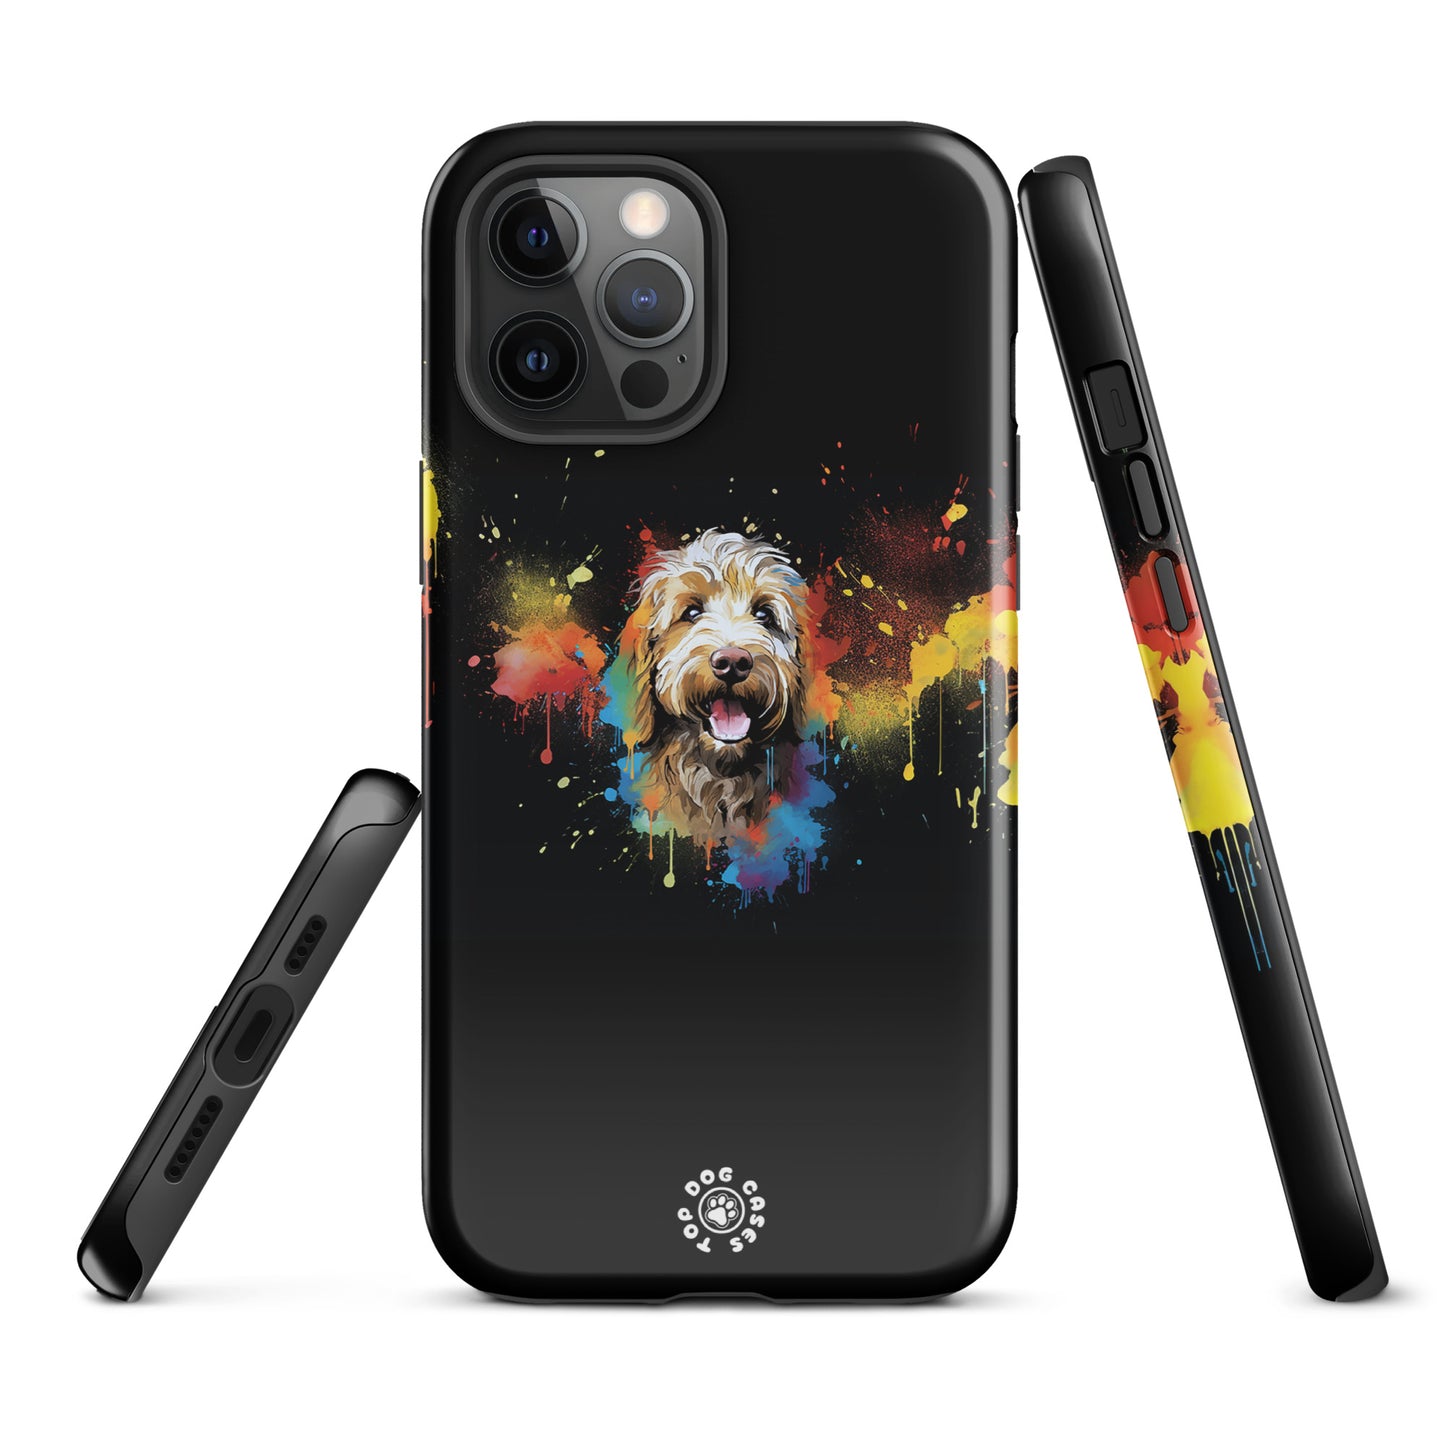 Goldendoodle- Colorful Phone Case - iPhone Case - Top Dog Cases - #ColorfulPhoneCases, #Goldendoodle, #iPhone, #iPhone11, #iphone11case, #iPhone12, #iPhone12case, #iPhone13, #iPhone13case, #iPhone13DogCase, #iPhone13Mini, #iPhone13Pro, #iPhone13ProMax, #iPhone14, #iPhone14case, #iPhone14DogCase, #iPhone14Plus, #iPhone14Pluscase, #iPhone14Pro, #iPhone14ProMax, #iPhone14ProMaxCase, #iPhone15, #iPhone15case, #iPhonecase, #iphonedogcase, #MiniGoldendoodle, #MiniGoldendoodleCase